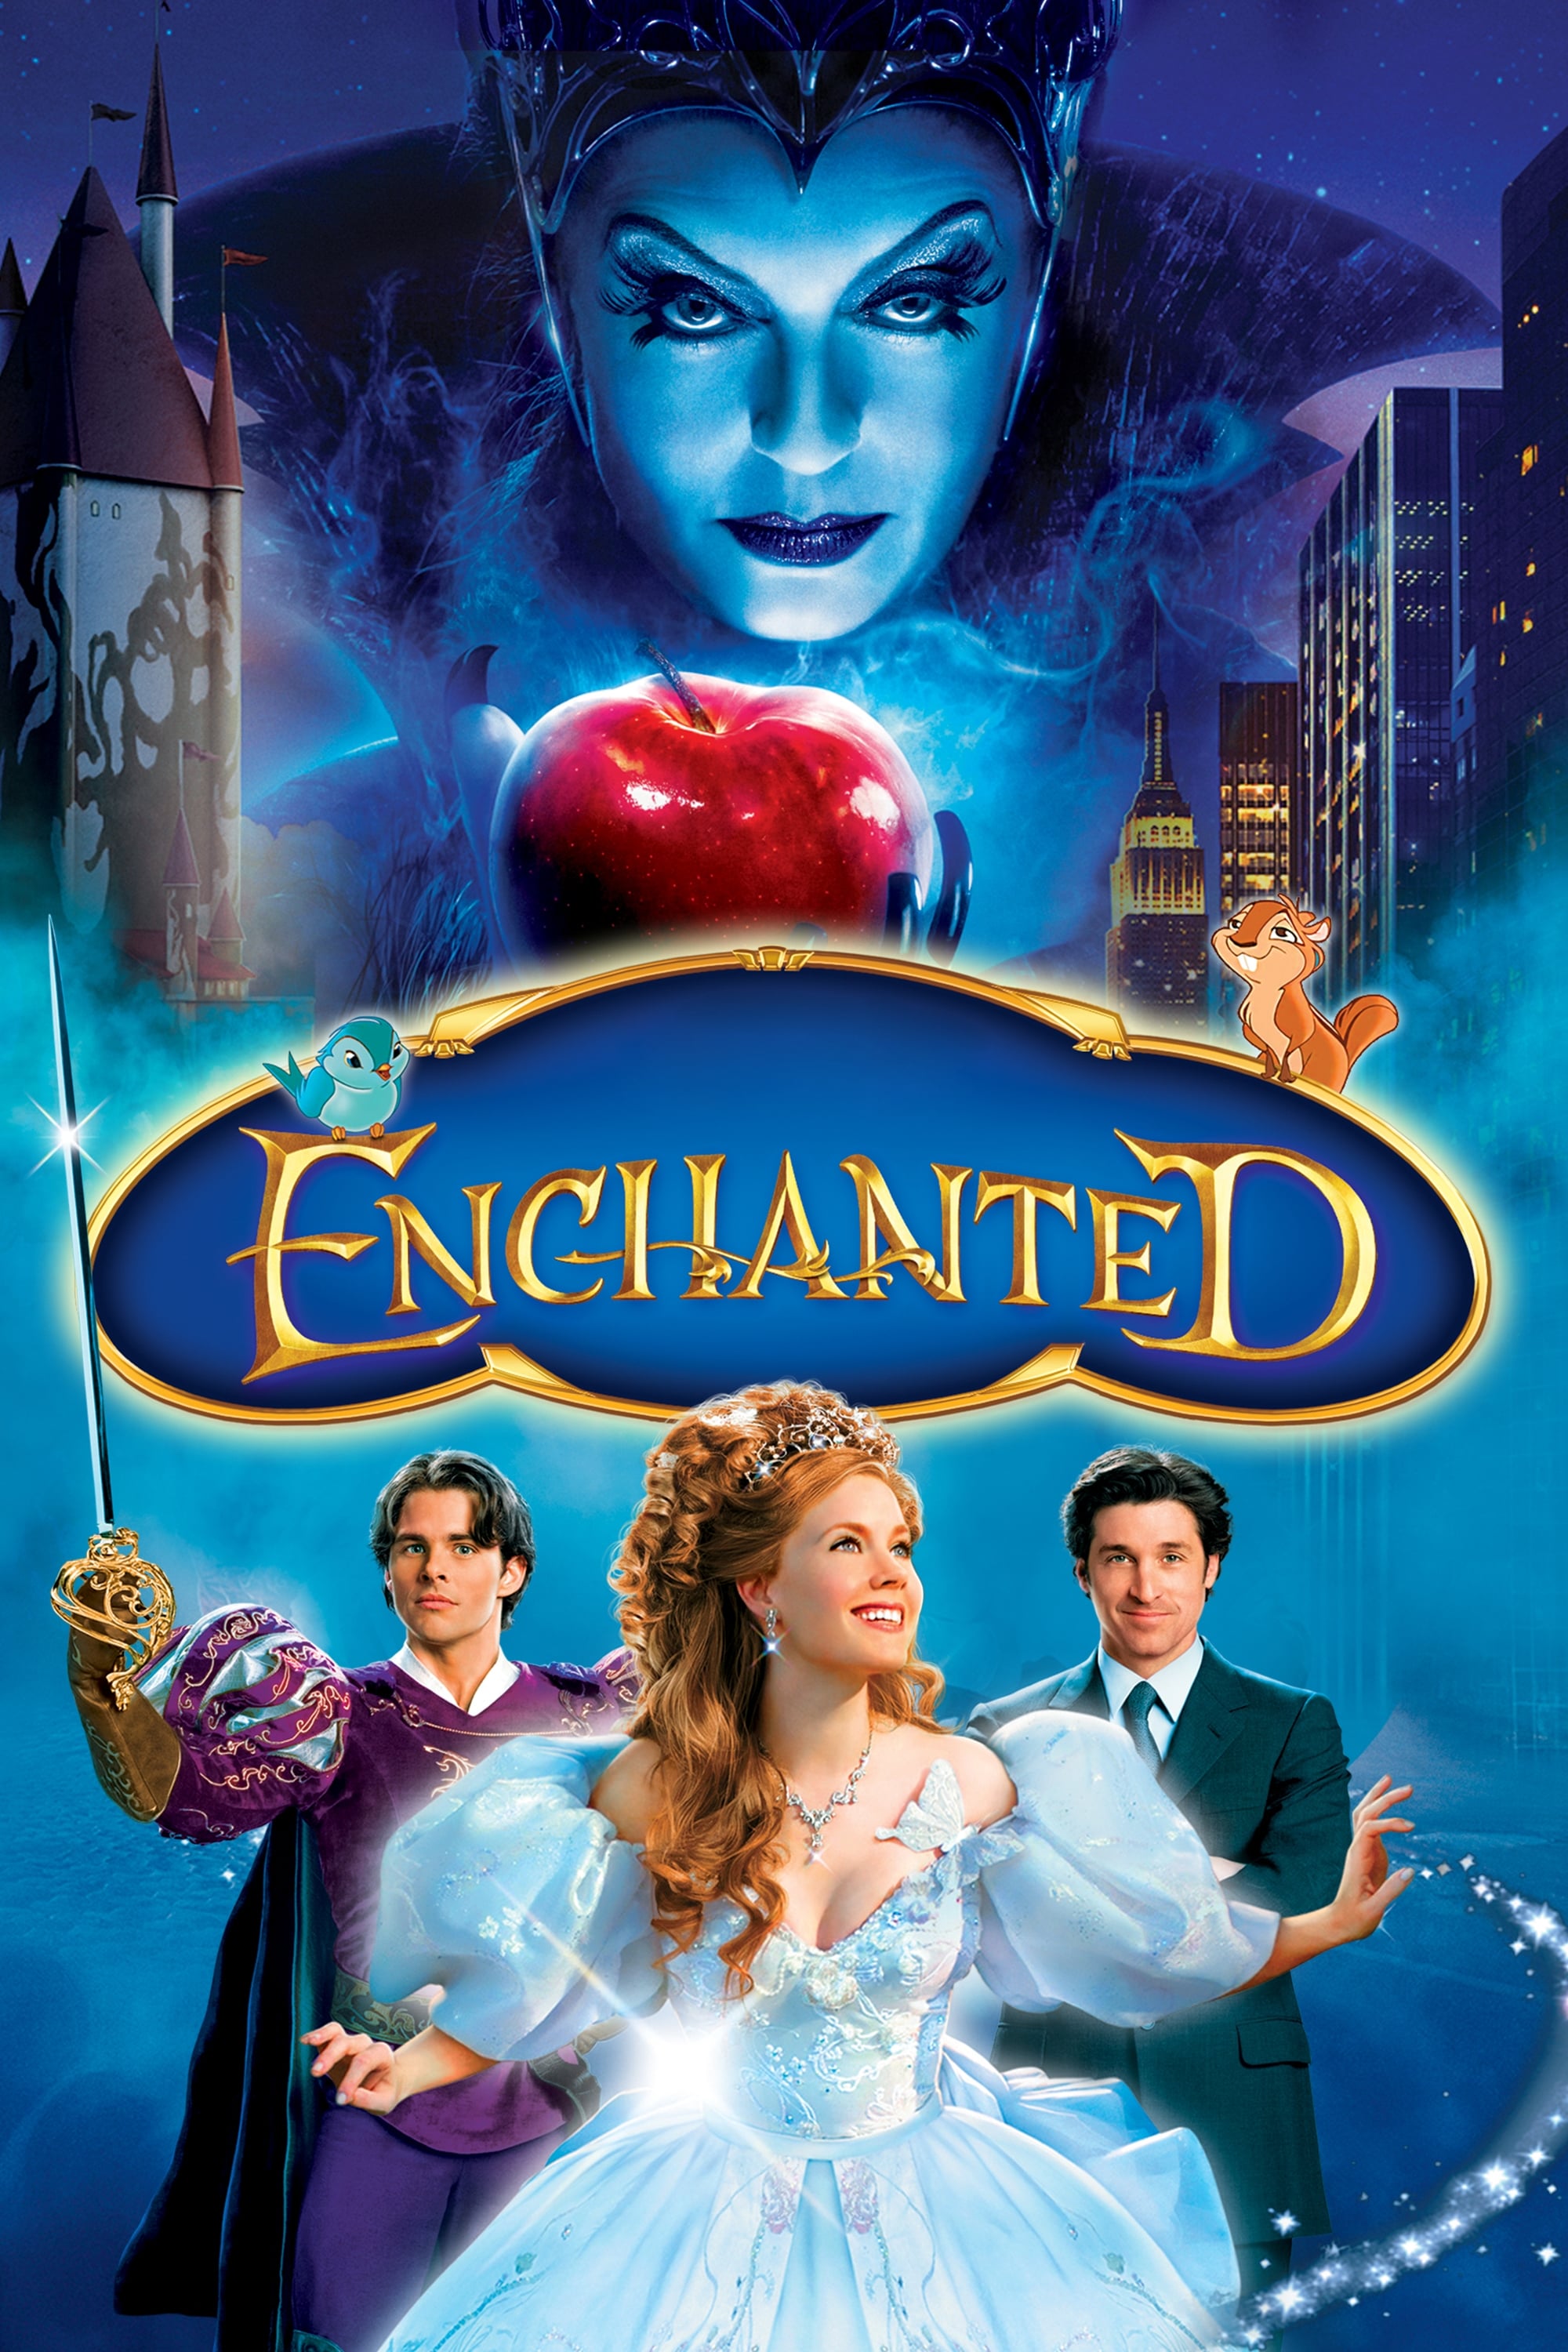 enchanted full movie download 720p